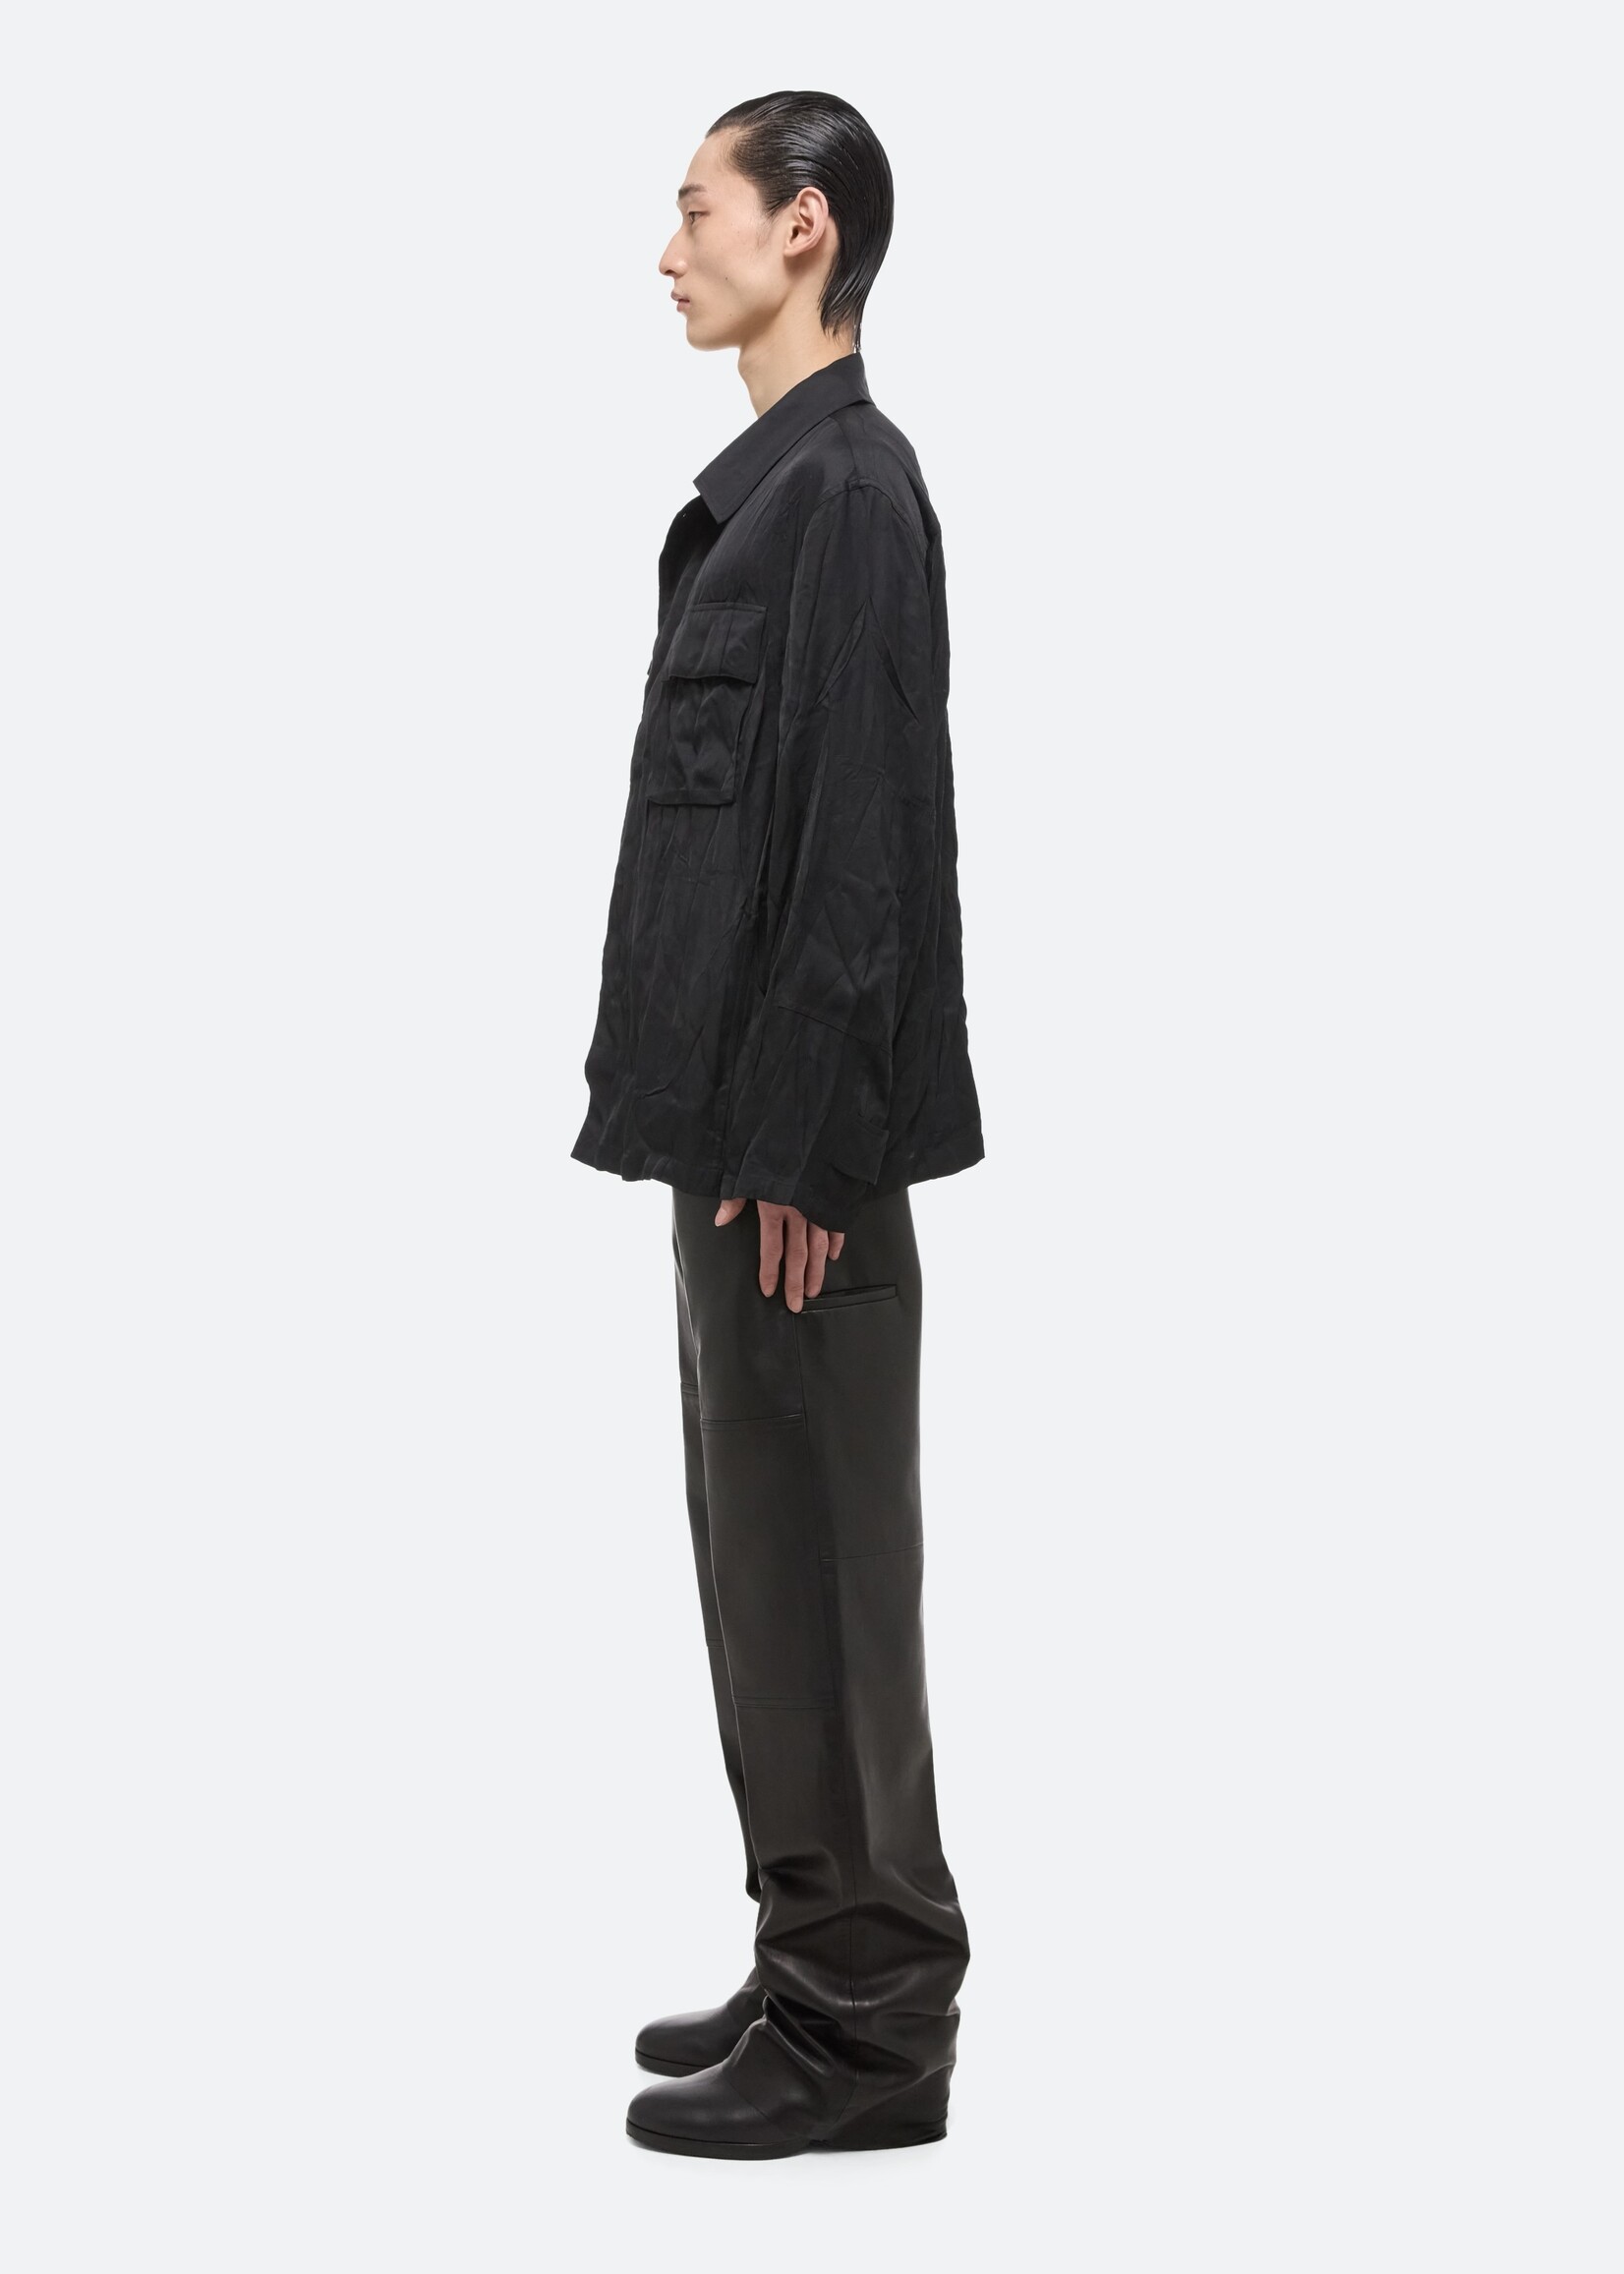 HELMUT LANG BY PETER DO Crushed Utility Jacket in Black